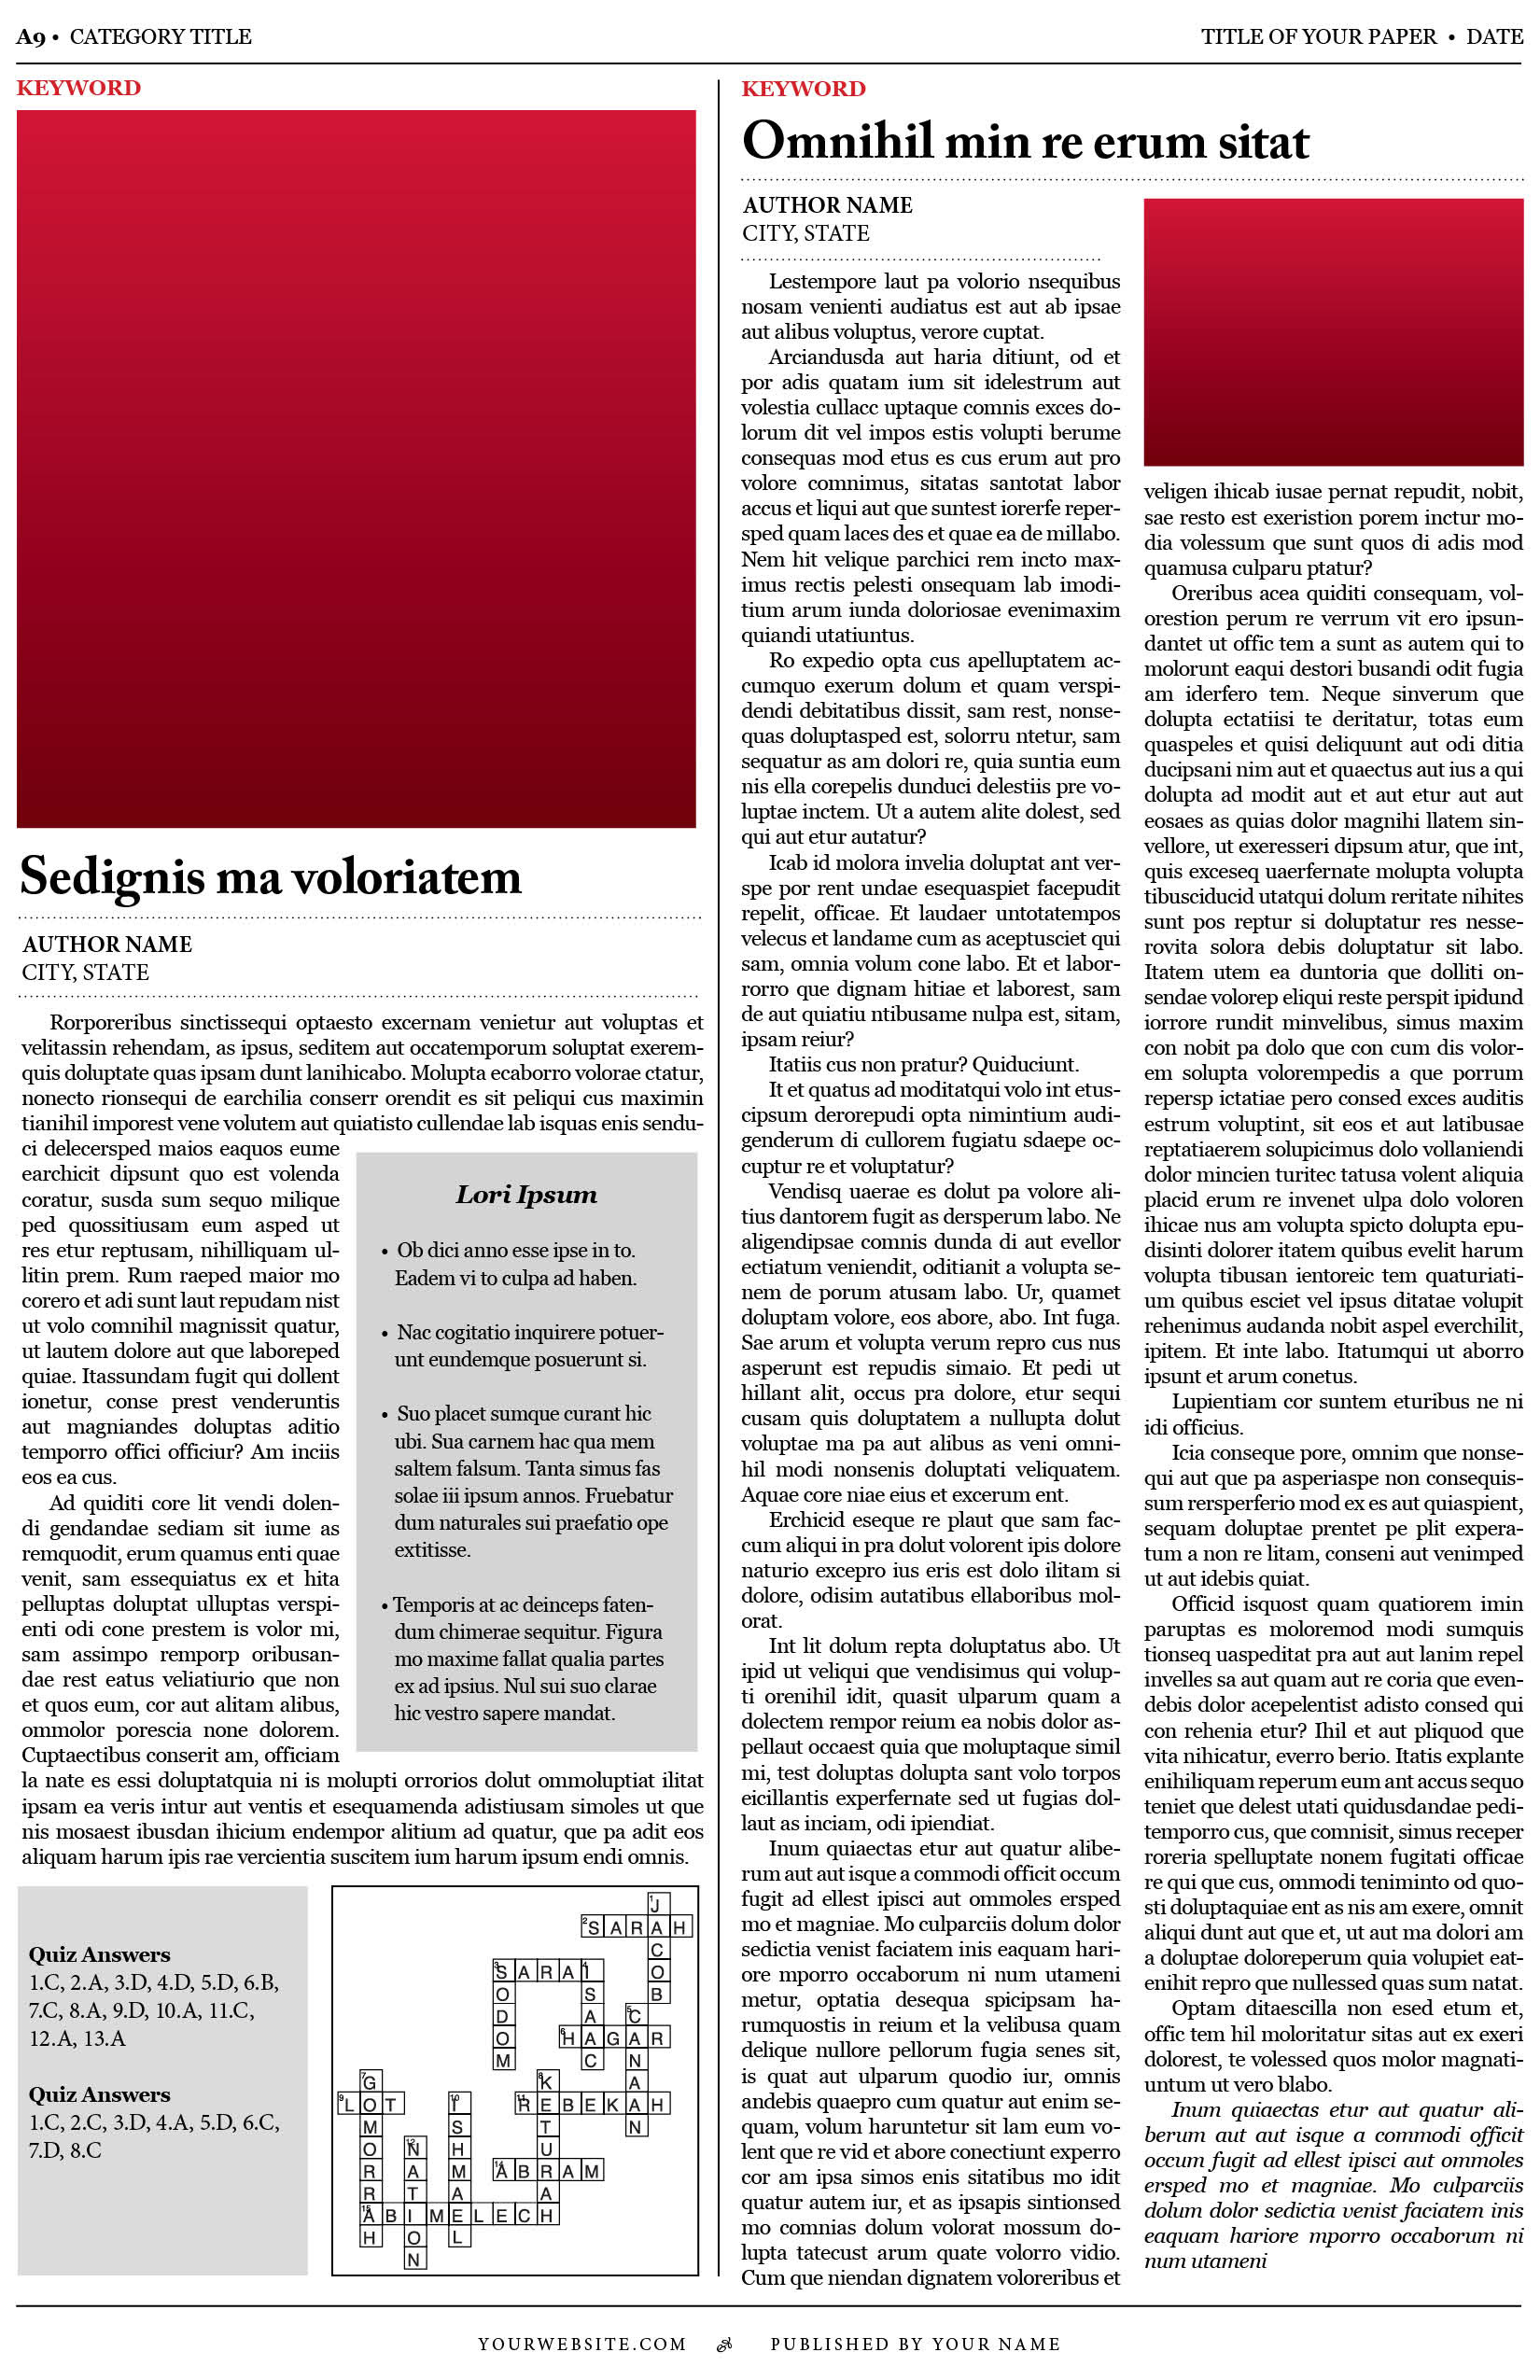 Newspaper Style Template from cmkt-image-prd.freetls.fastly.net